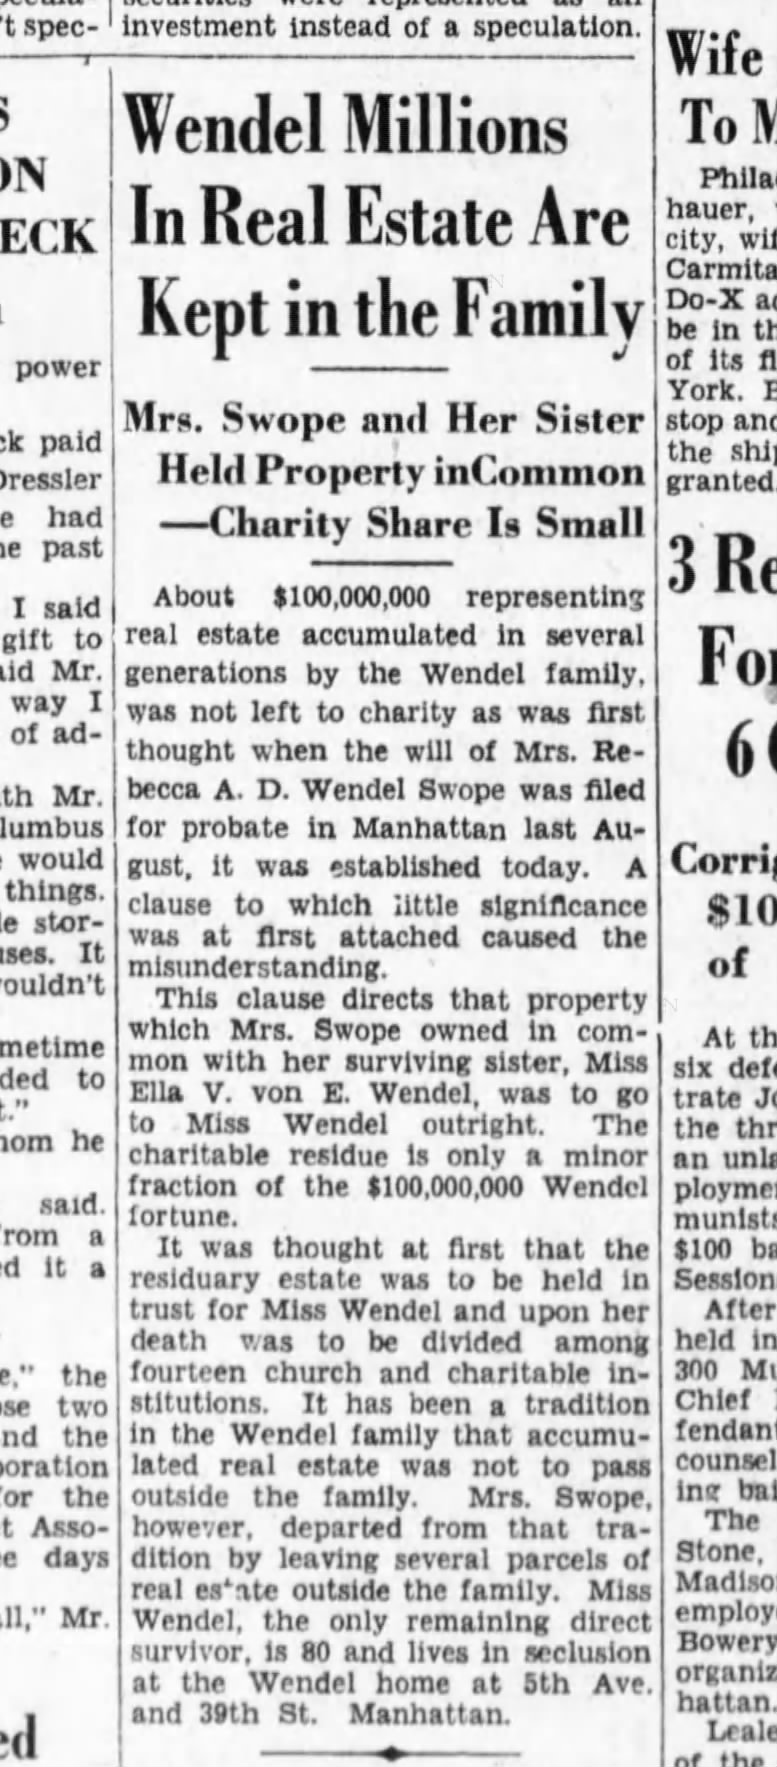 Wendel Millions Kept in Family, Brooklyn Daily Eagle, Oct 31, 1930, pg. 2